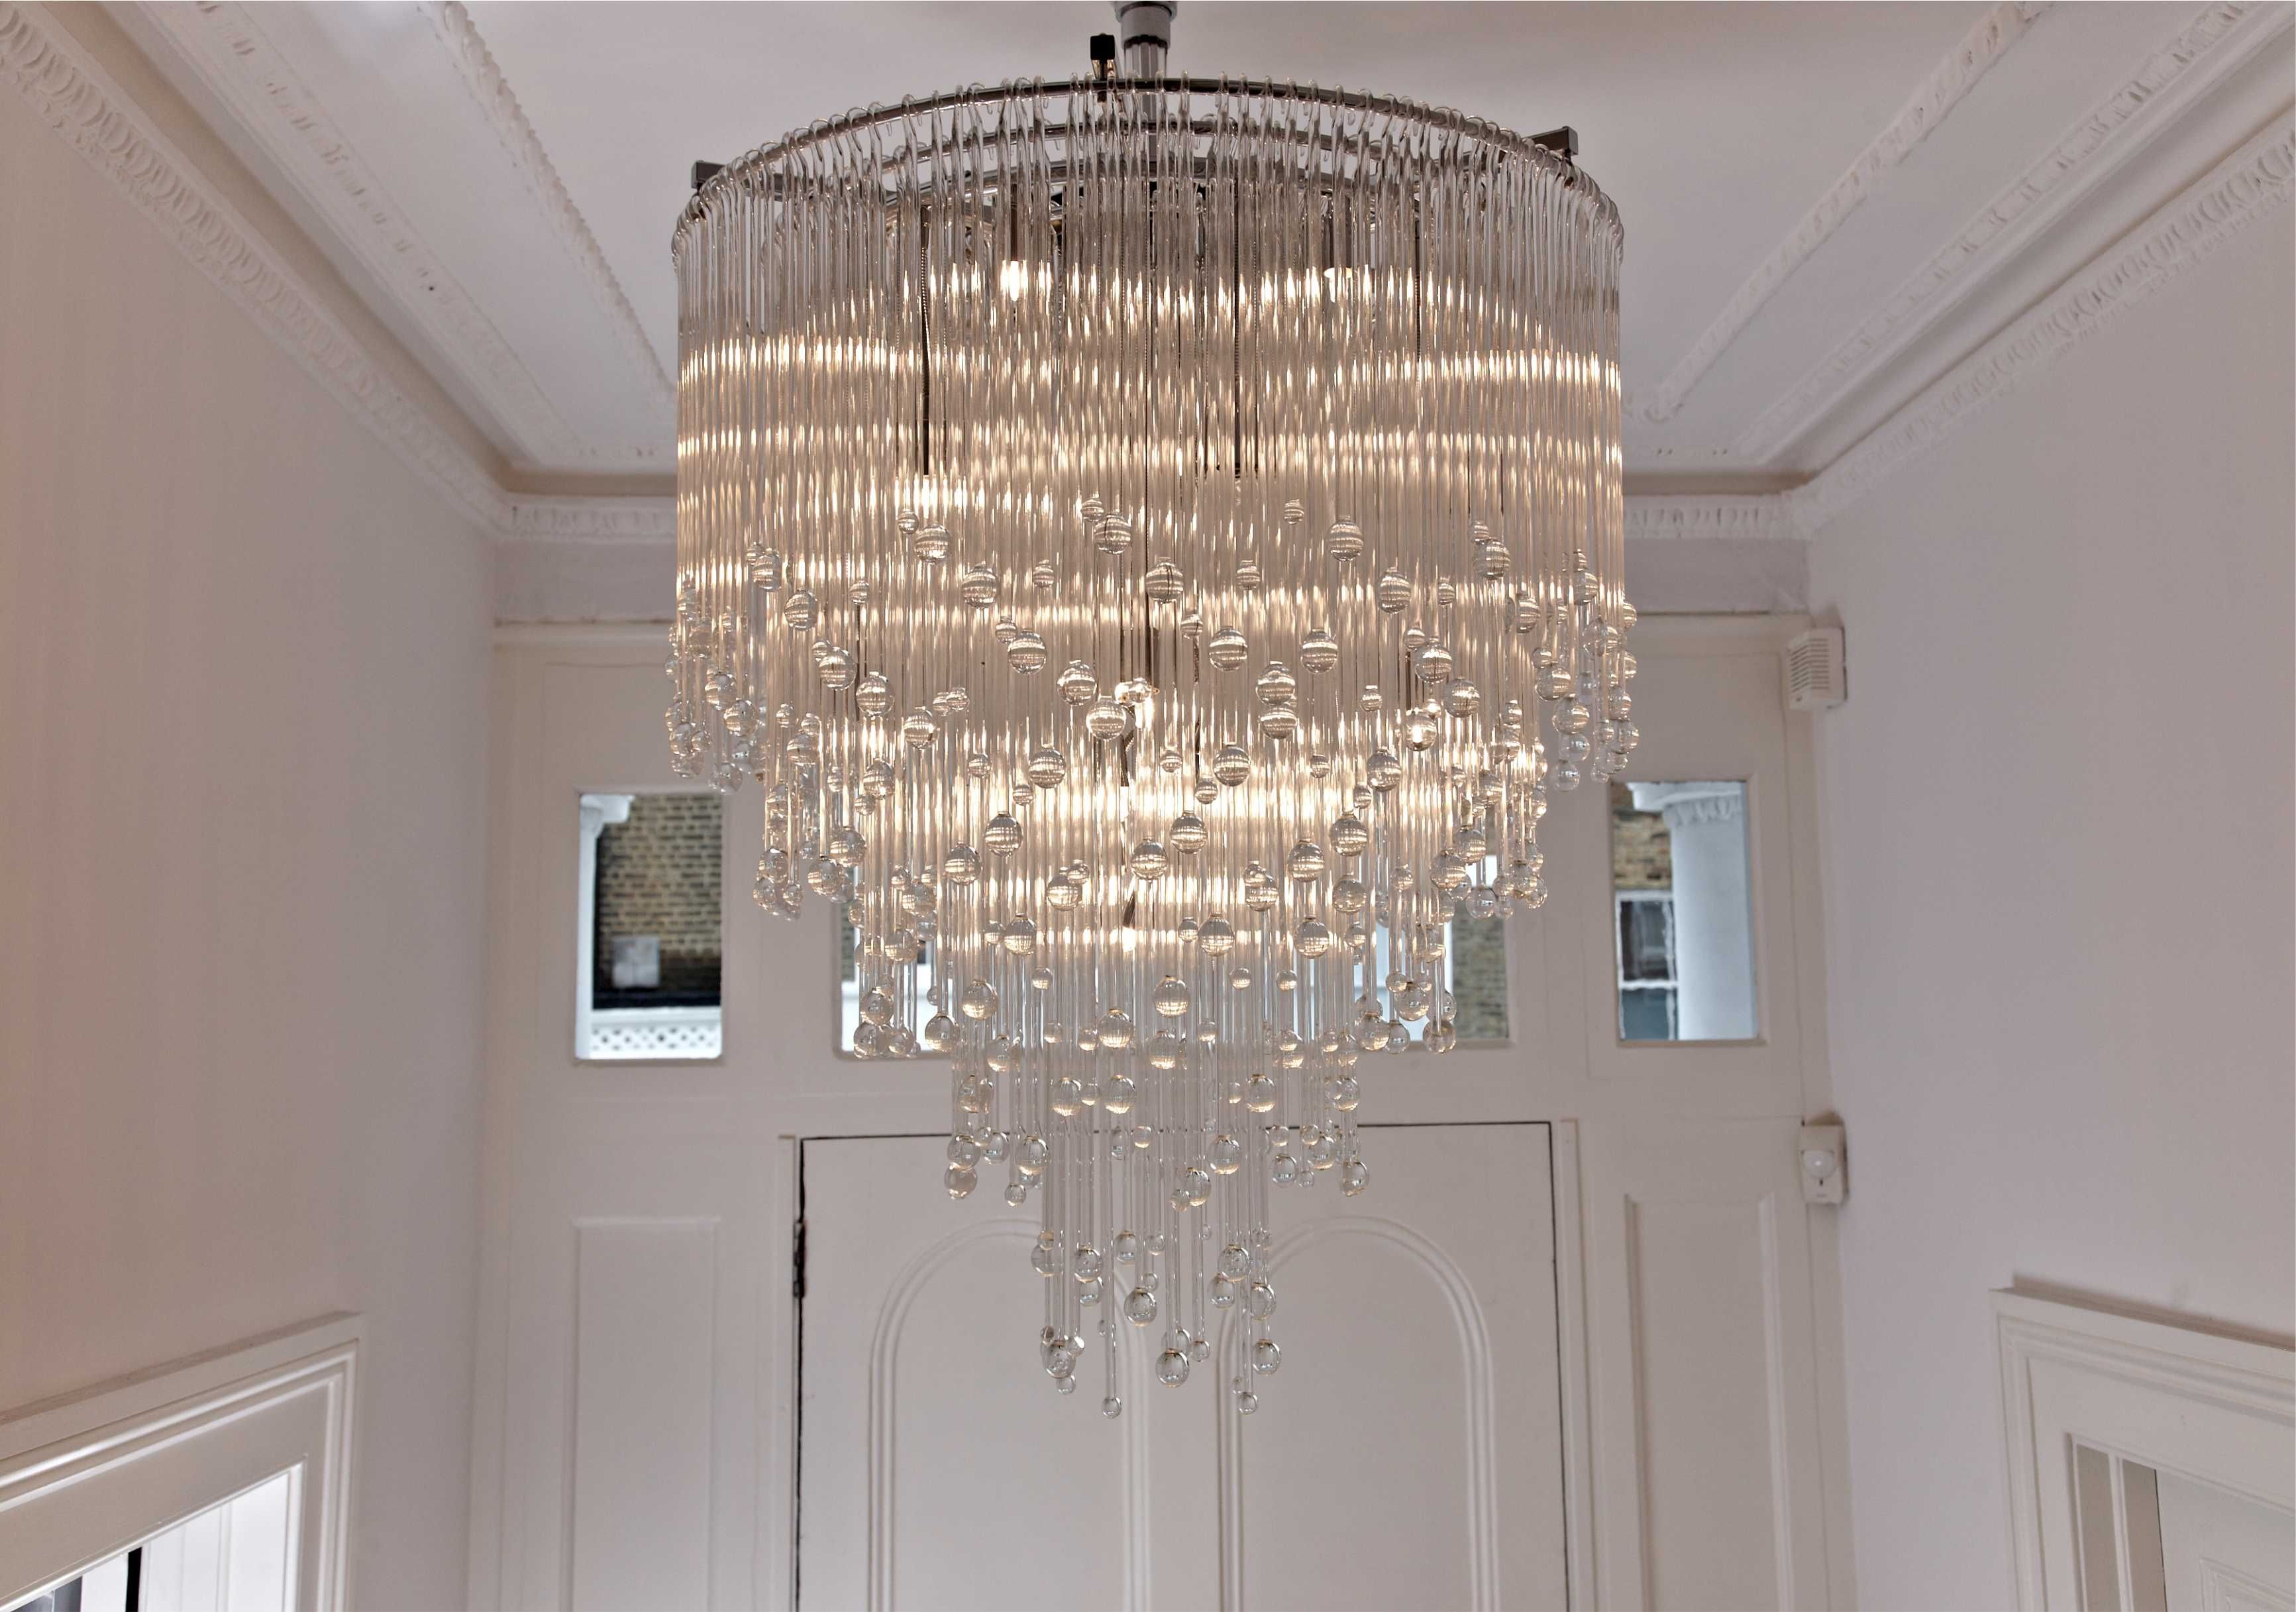 7 Useful Tips To Install Extra Large Modern Chandeliers Shining With Regard To Large Modern Chandeliers (View 2 of 15)